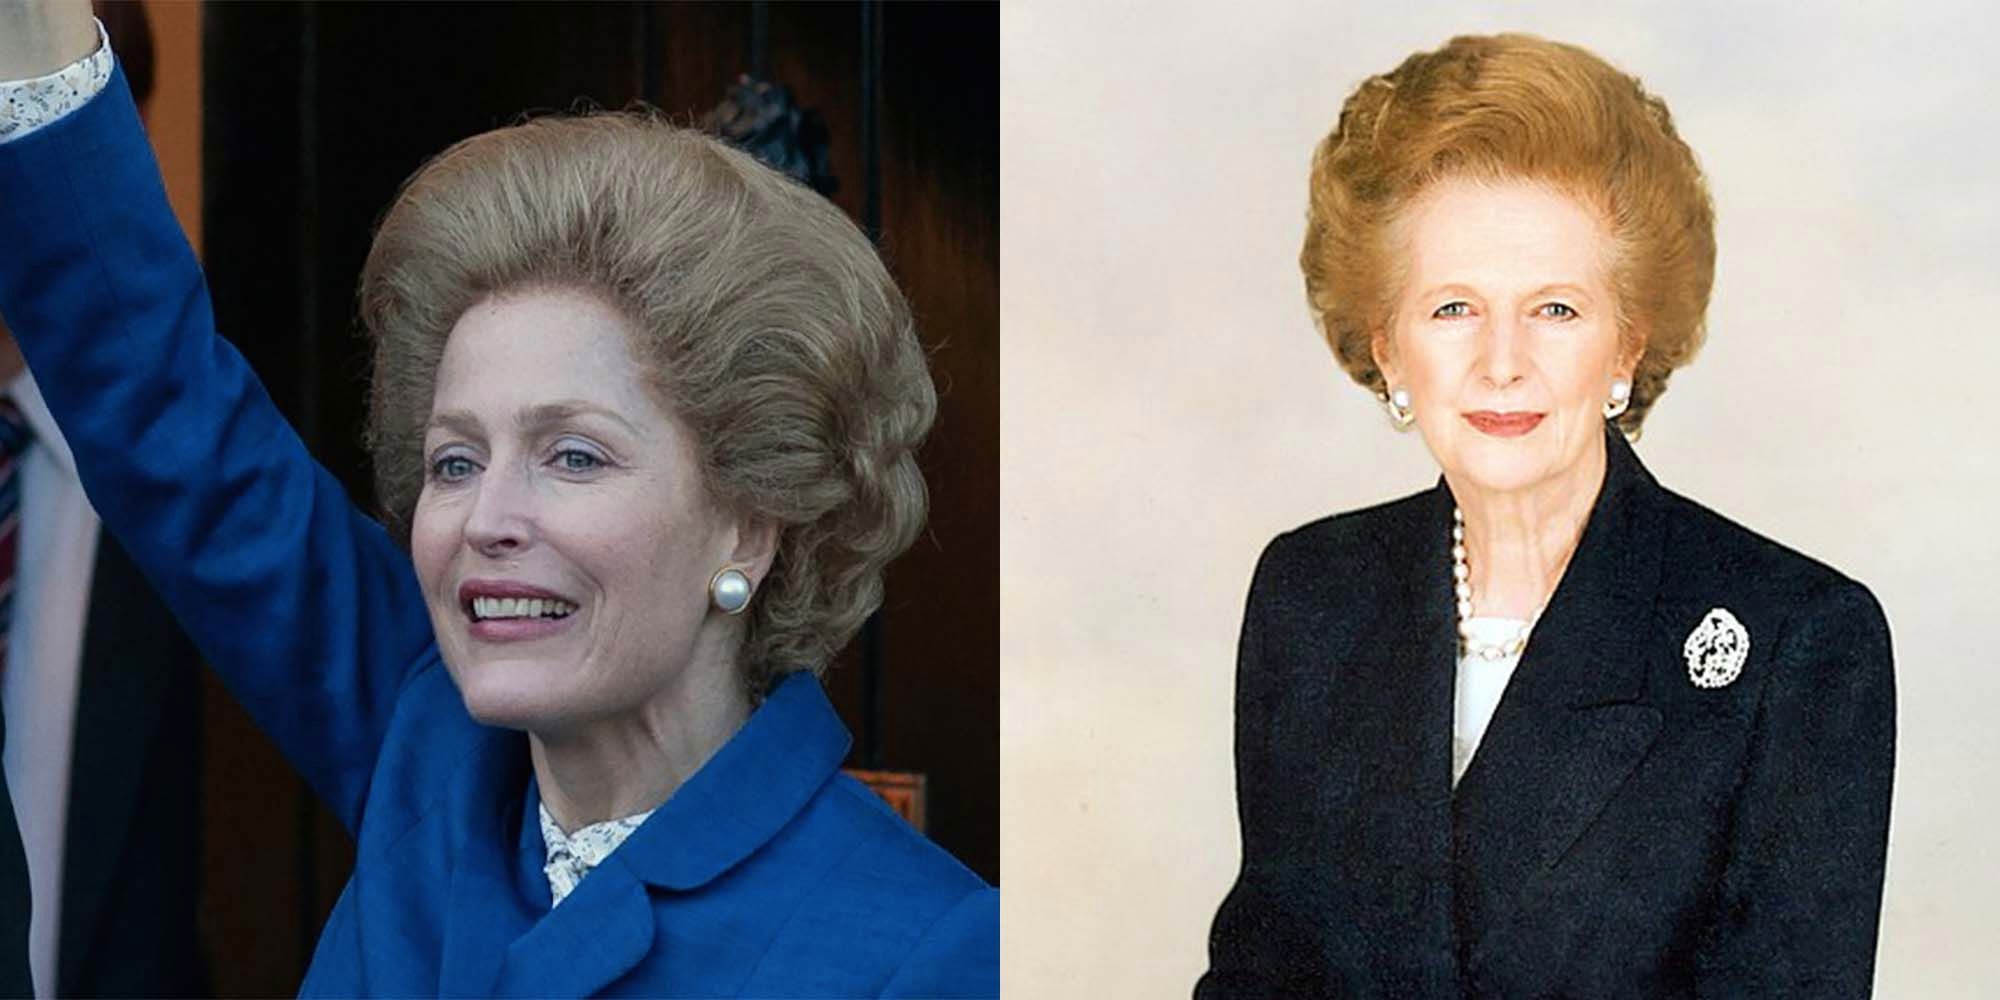 Split image of gillian anderson as Margaret thatcher in the crown and the real life thatcher.